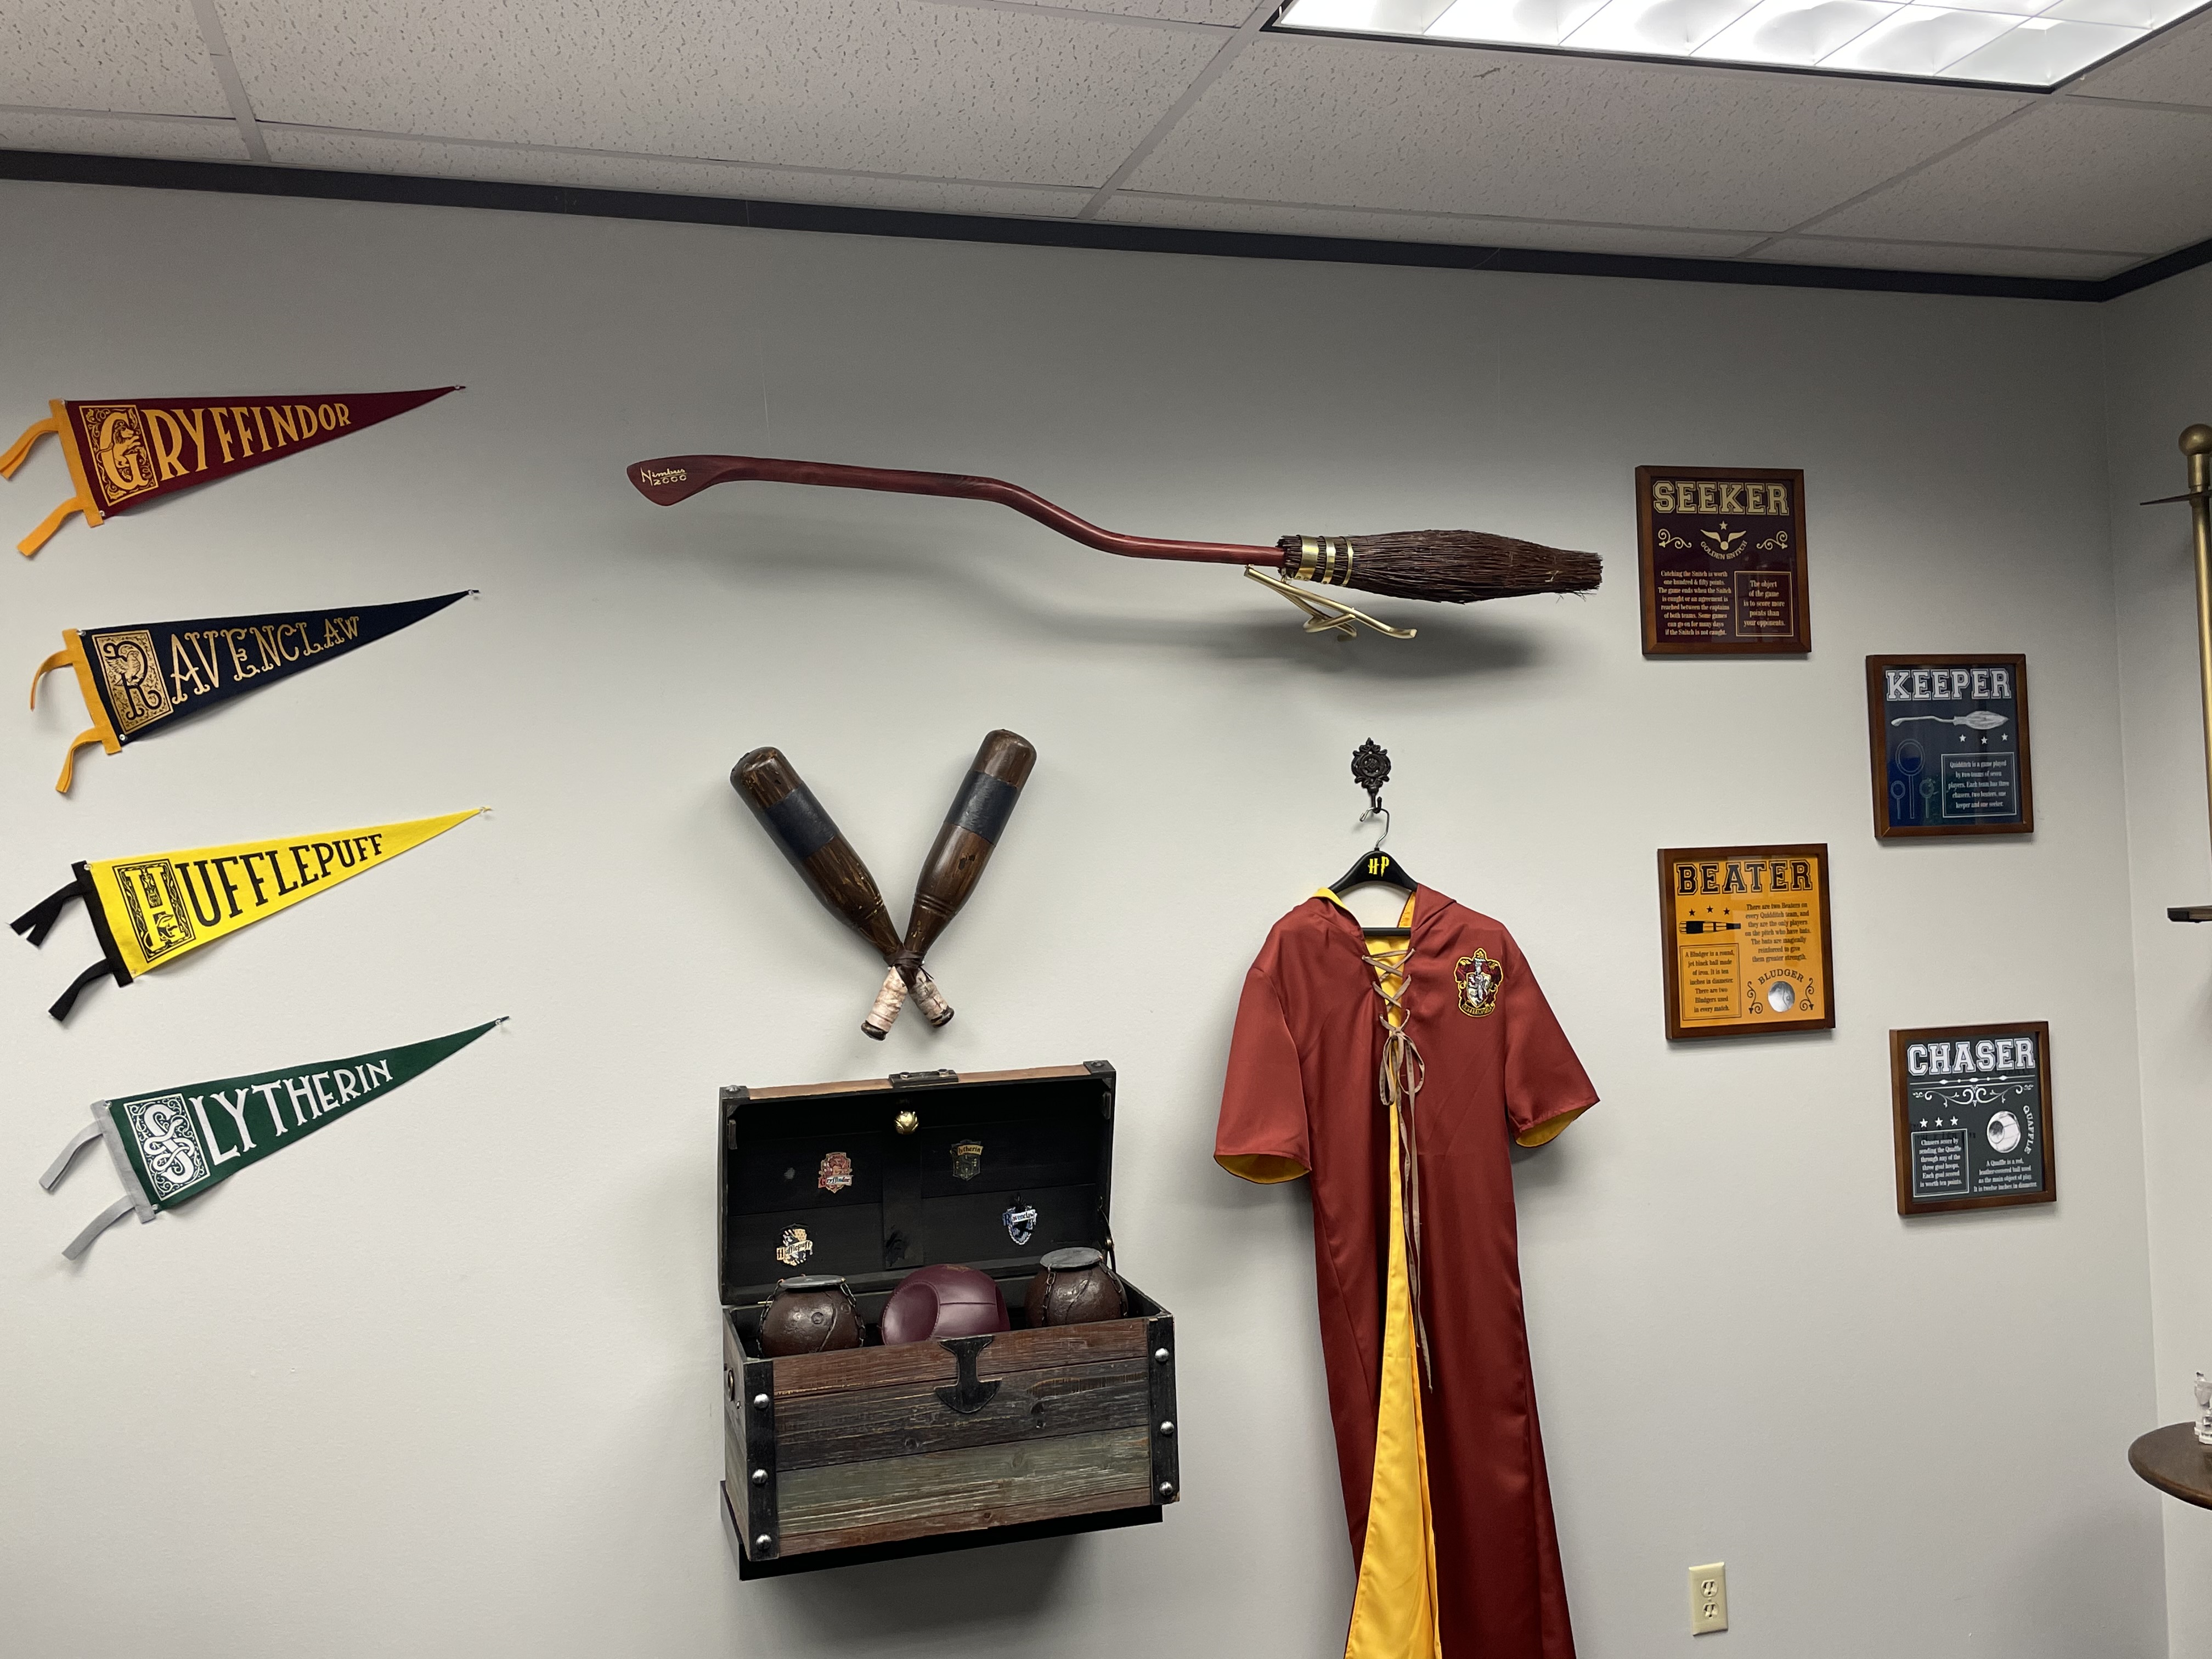 Harry Potter themed conference room added to our already non